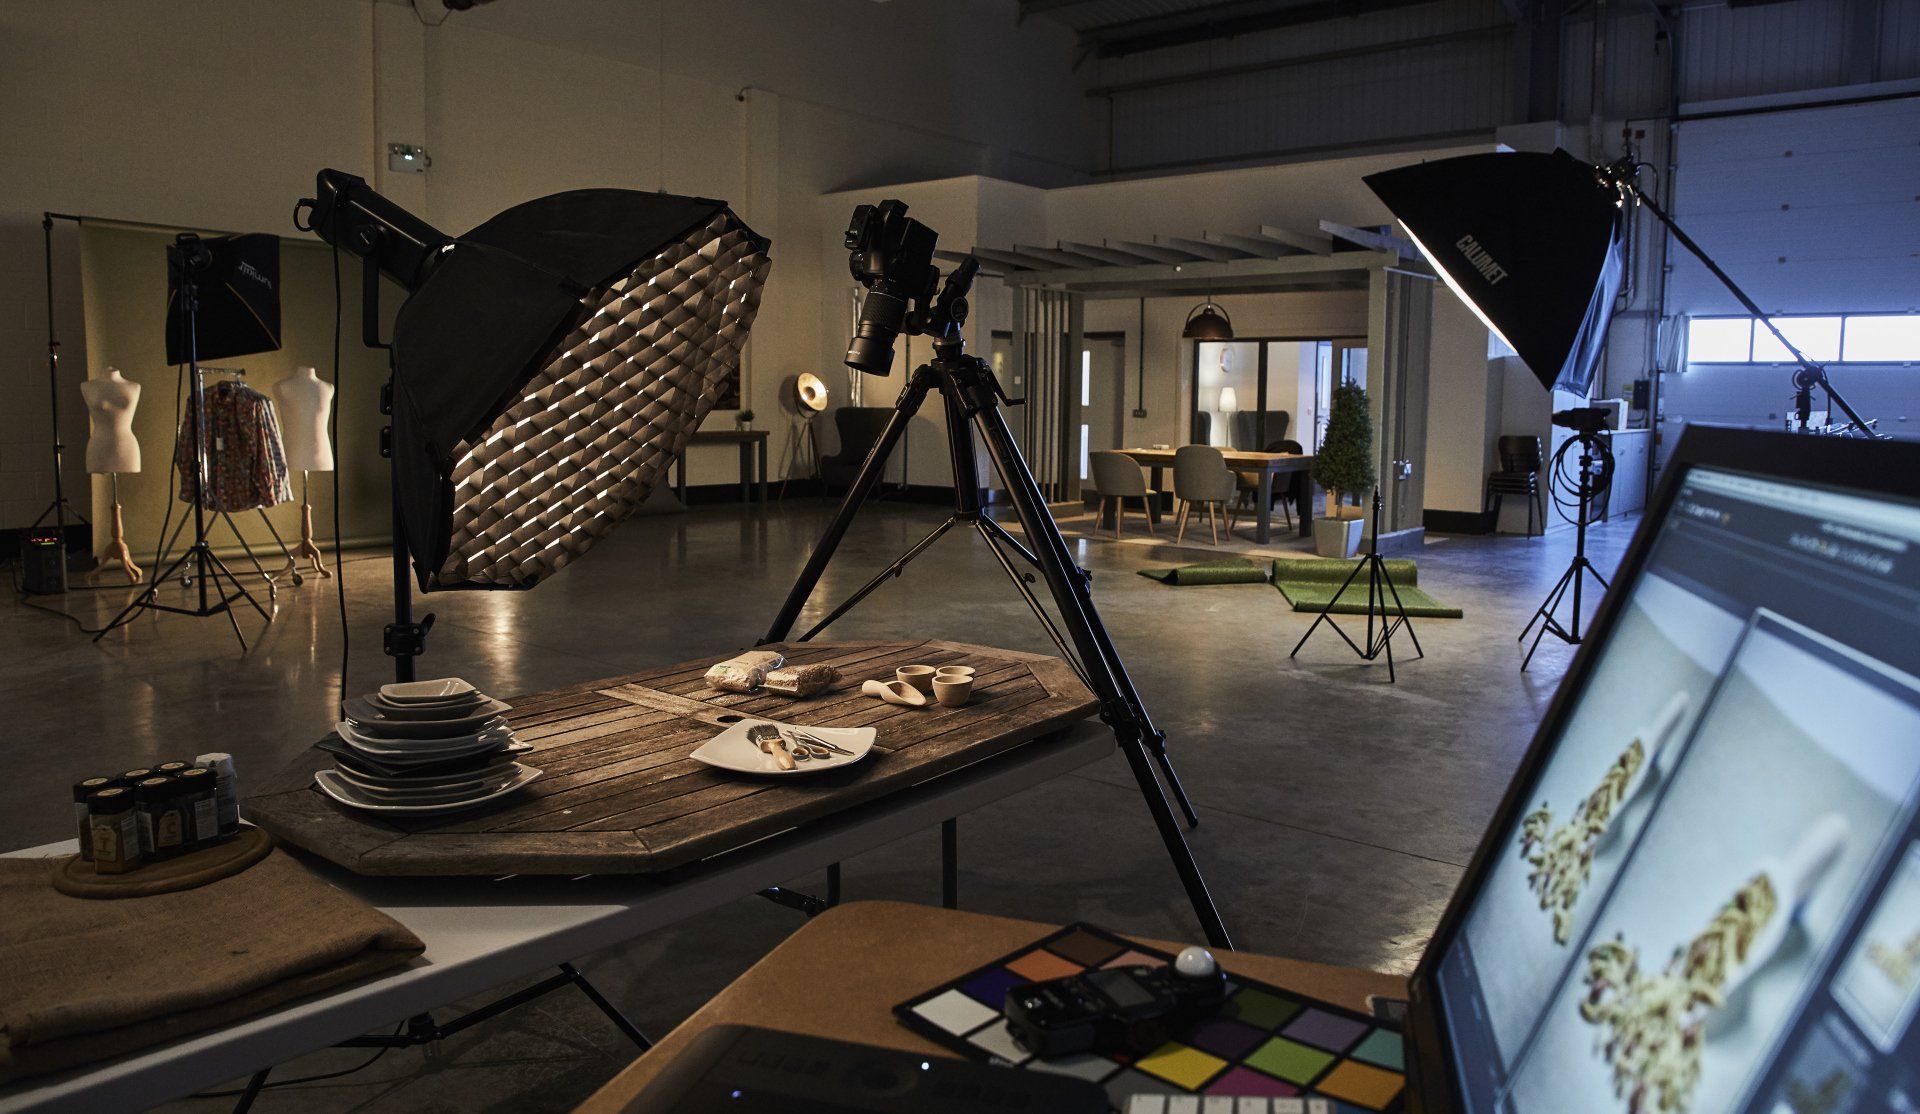 Lighting setup and camera on tripod aimed downwards for product photography